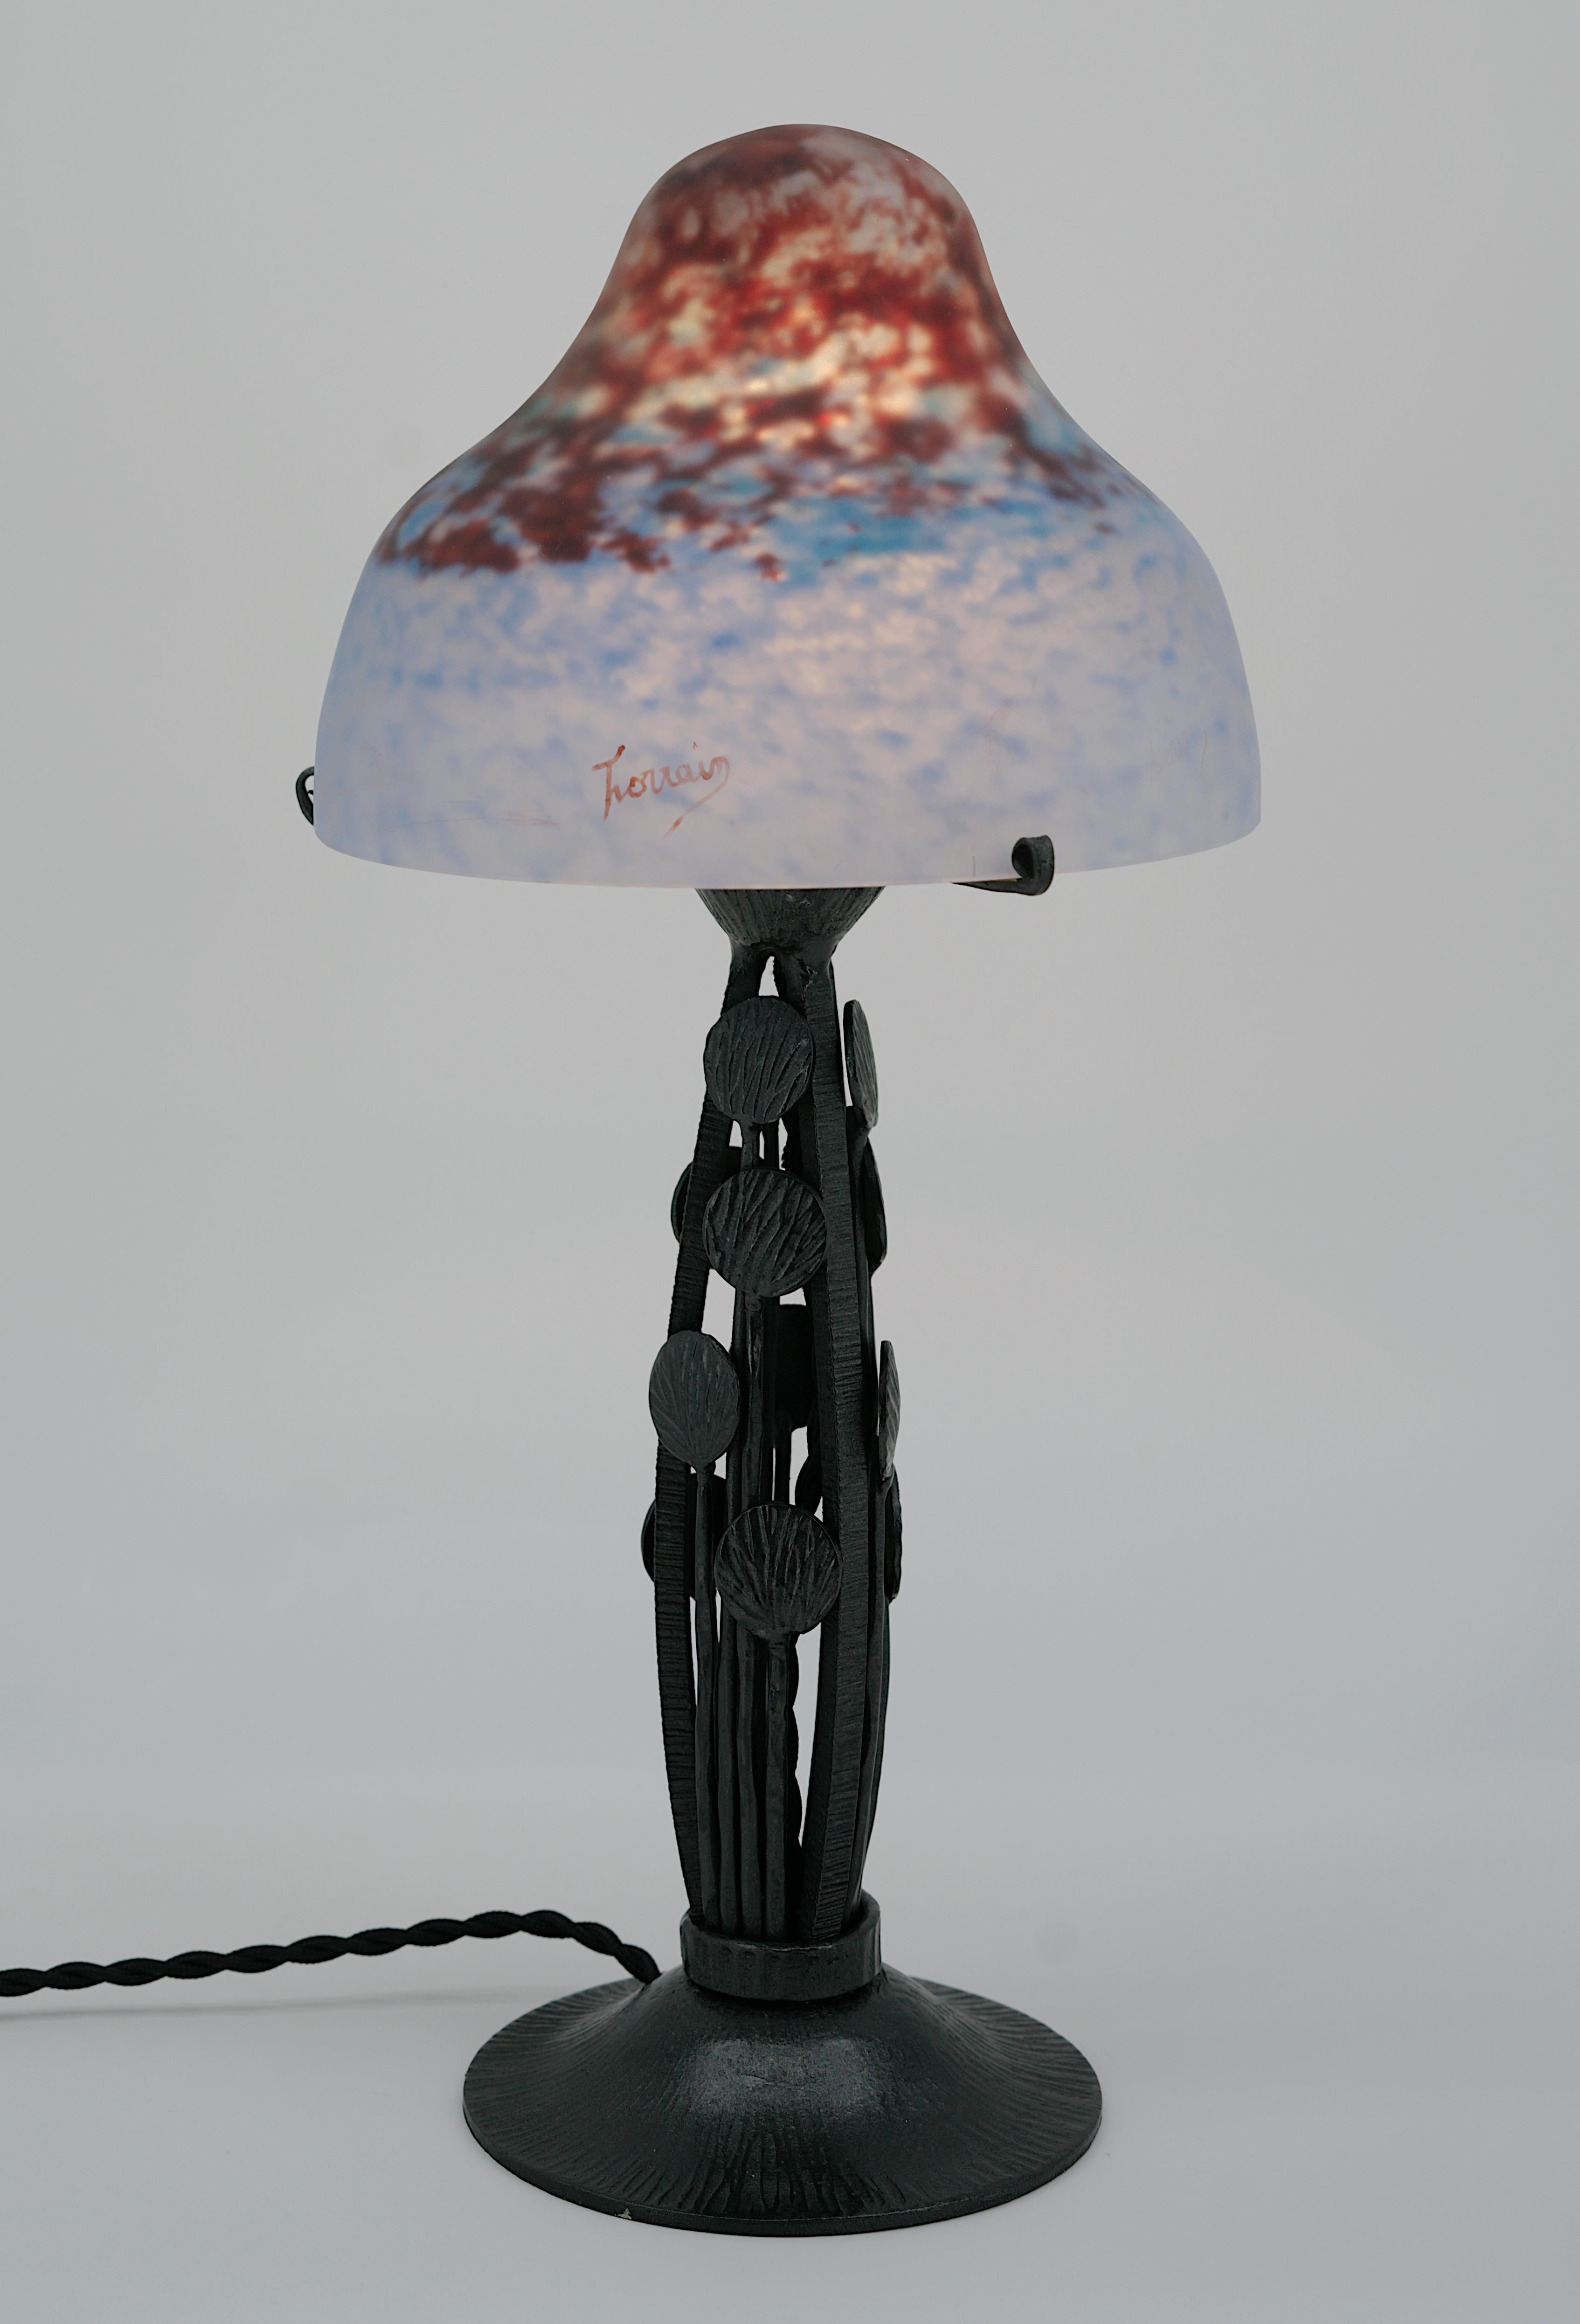 French Art Deco table lamp by DAUM (Croismare), France, 1920s. Blown double glass shade by Daum on its wrought iron base. Colors : blue and purple. Height : 14.4